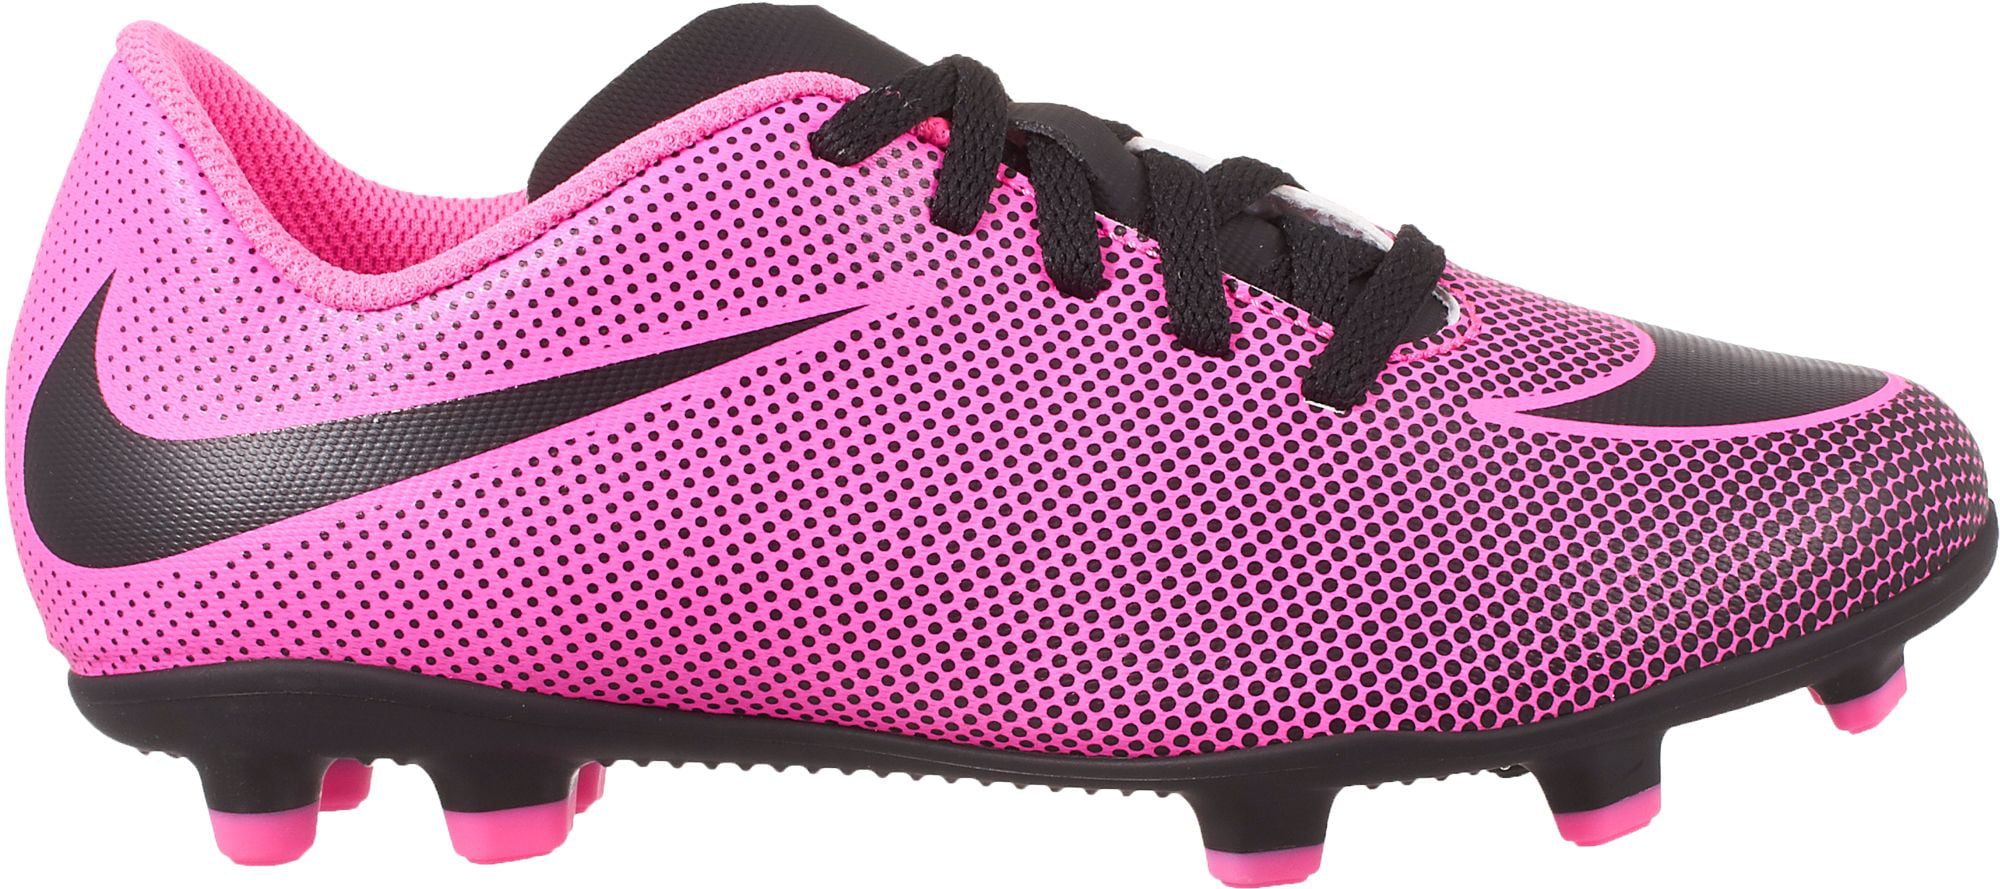 nike pink soccer cleats